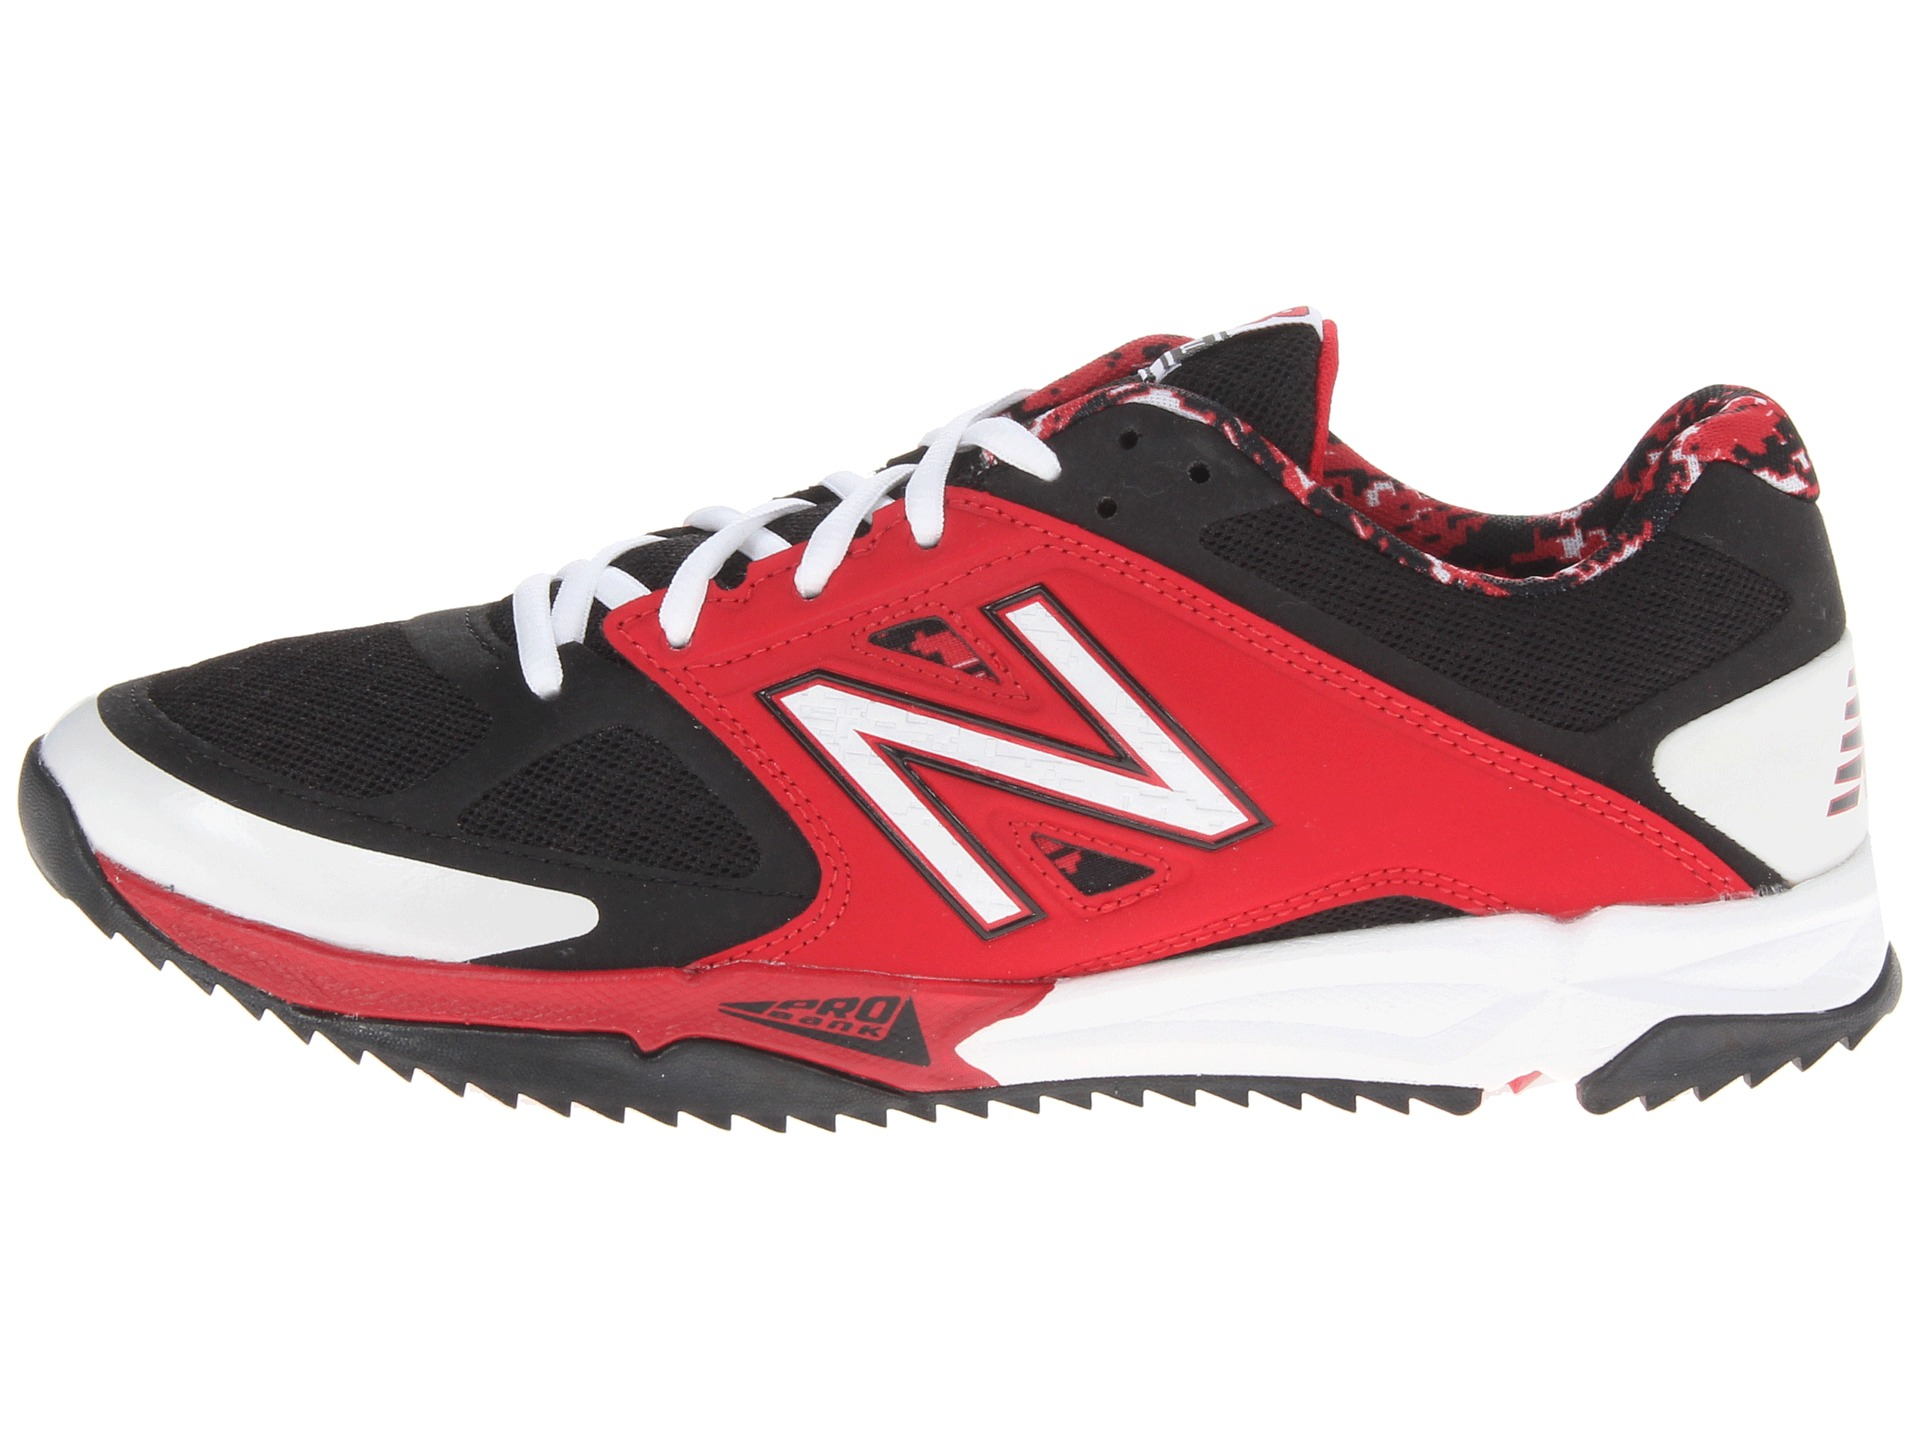 New Balance Synthetic 4040v2 Turf in Black/Red (Black) for Men - Lyst